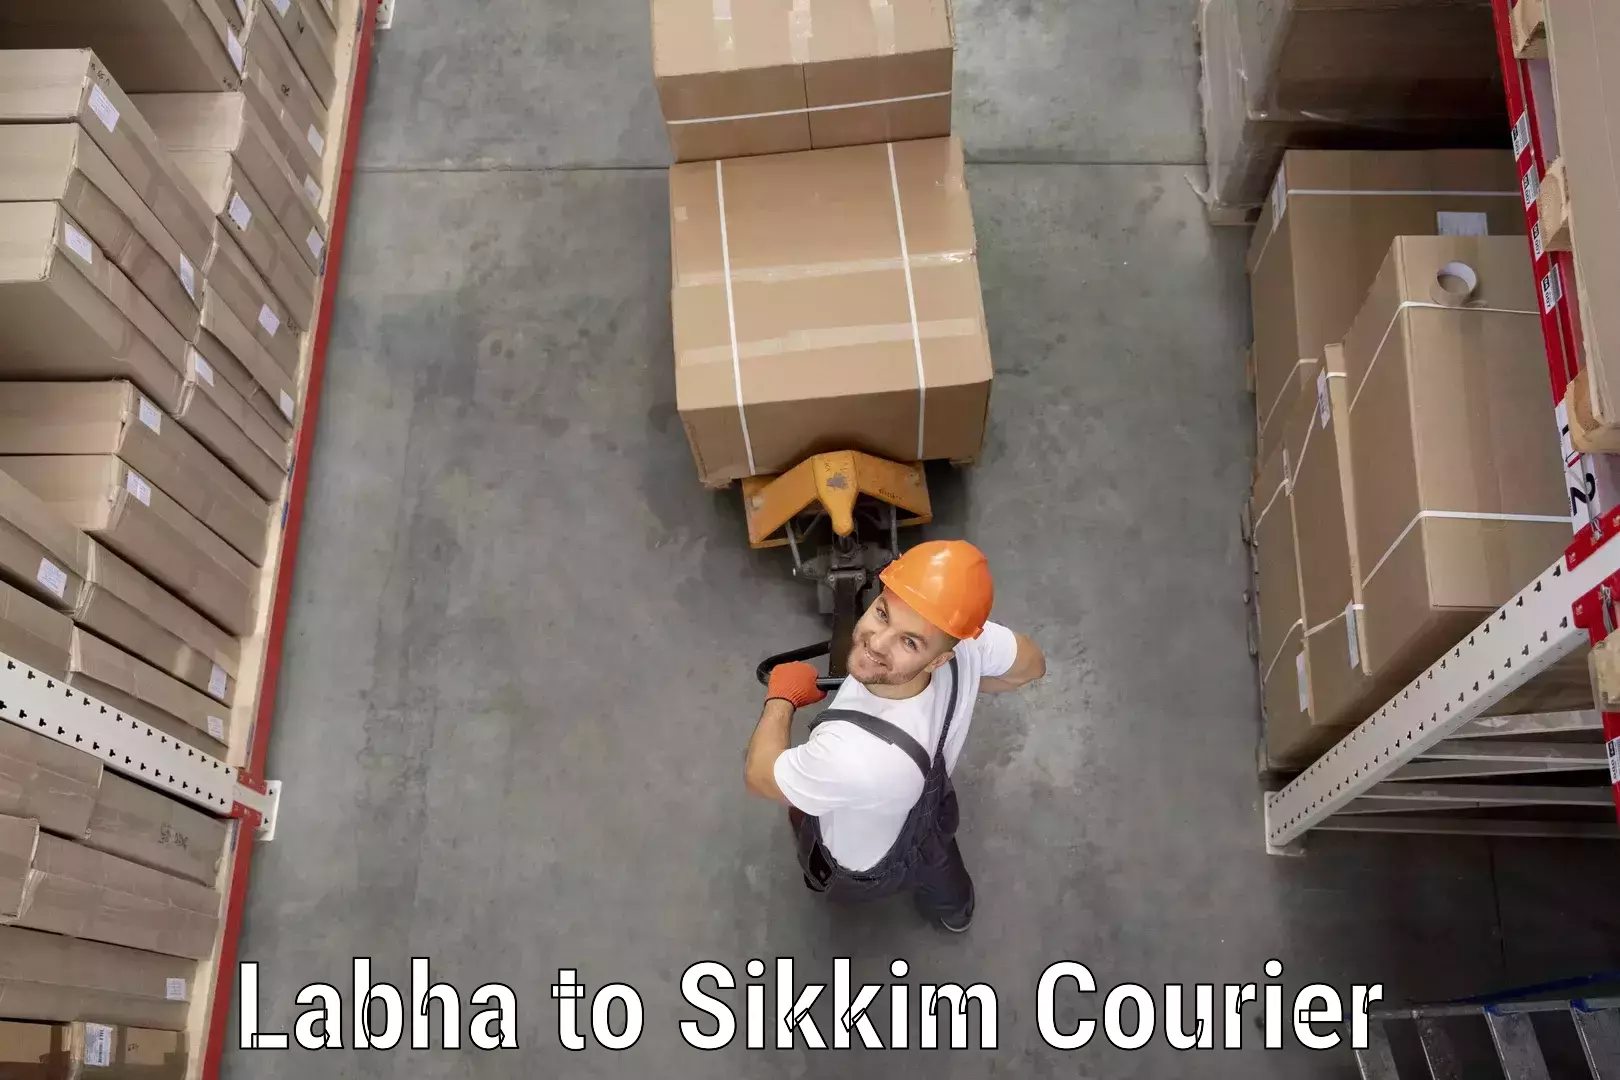 International courier networks Labha to Sikkim